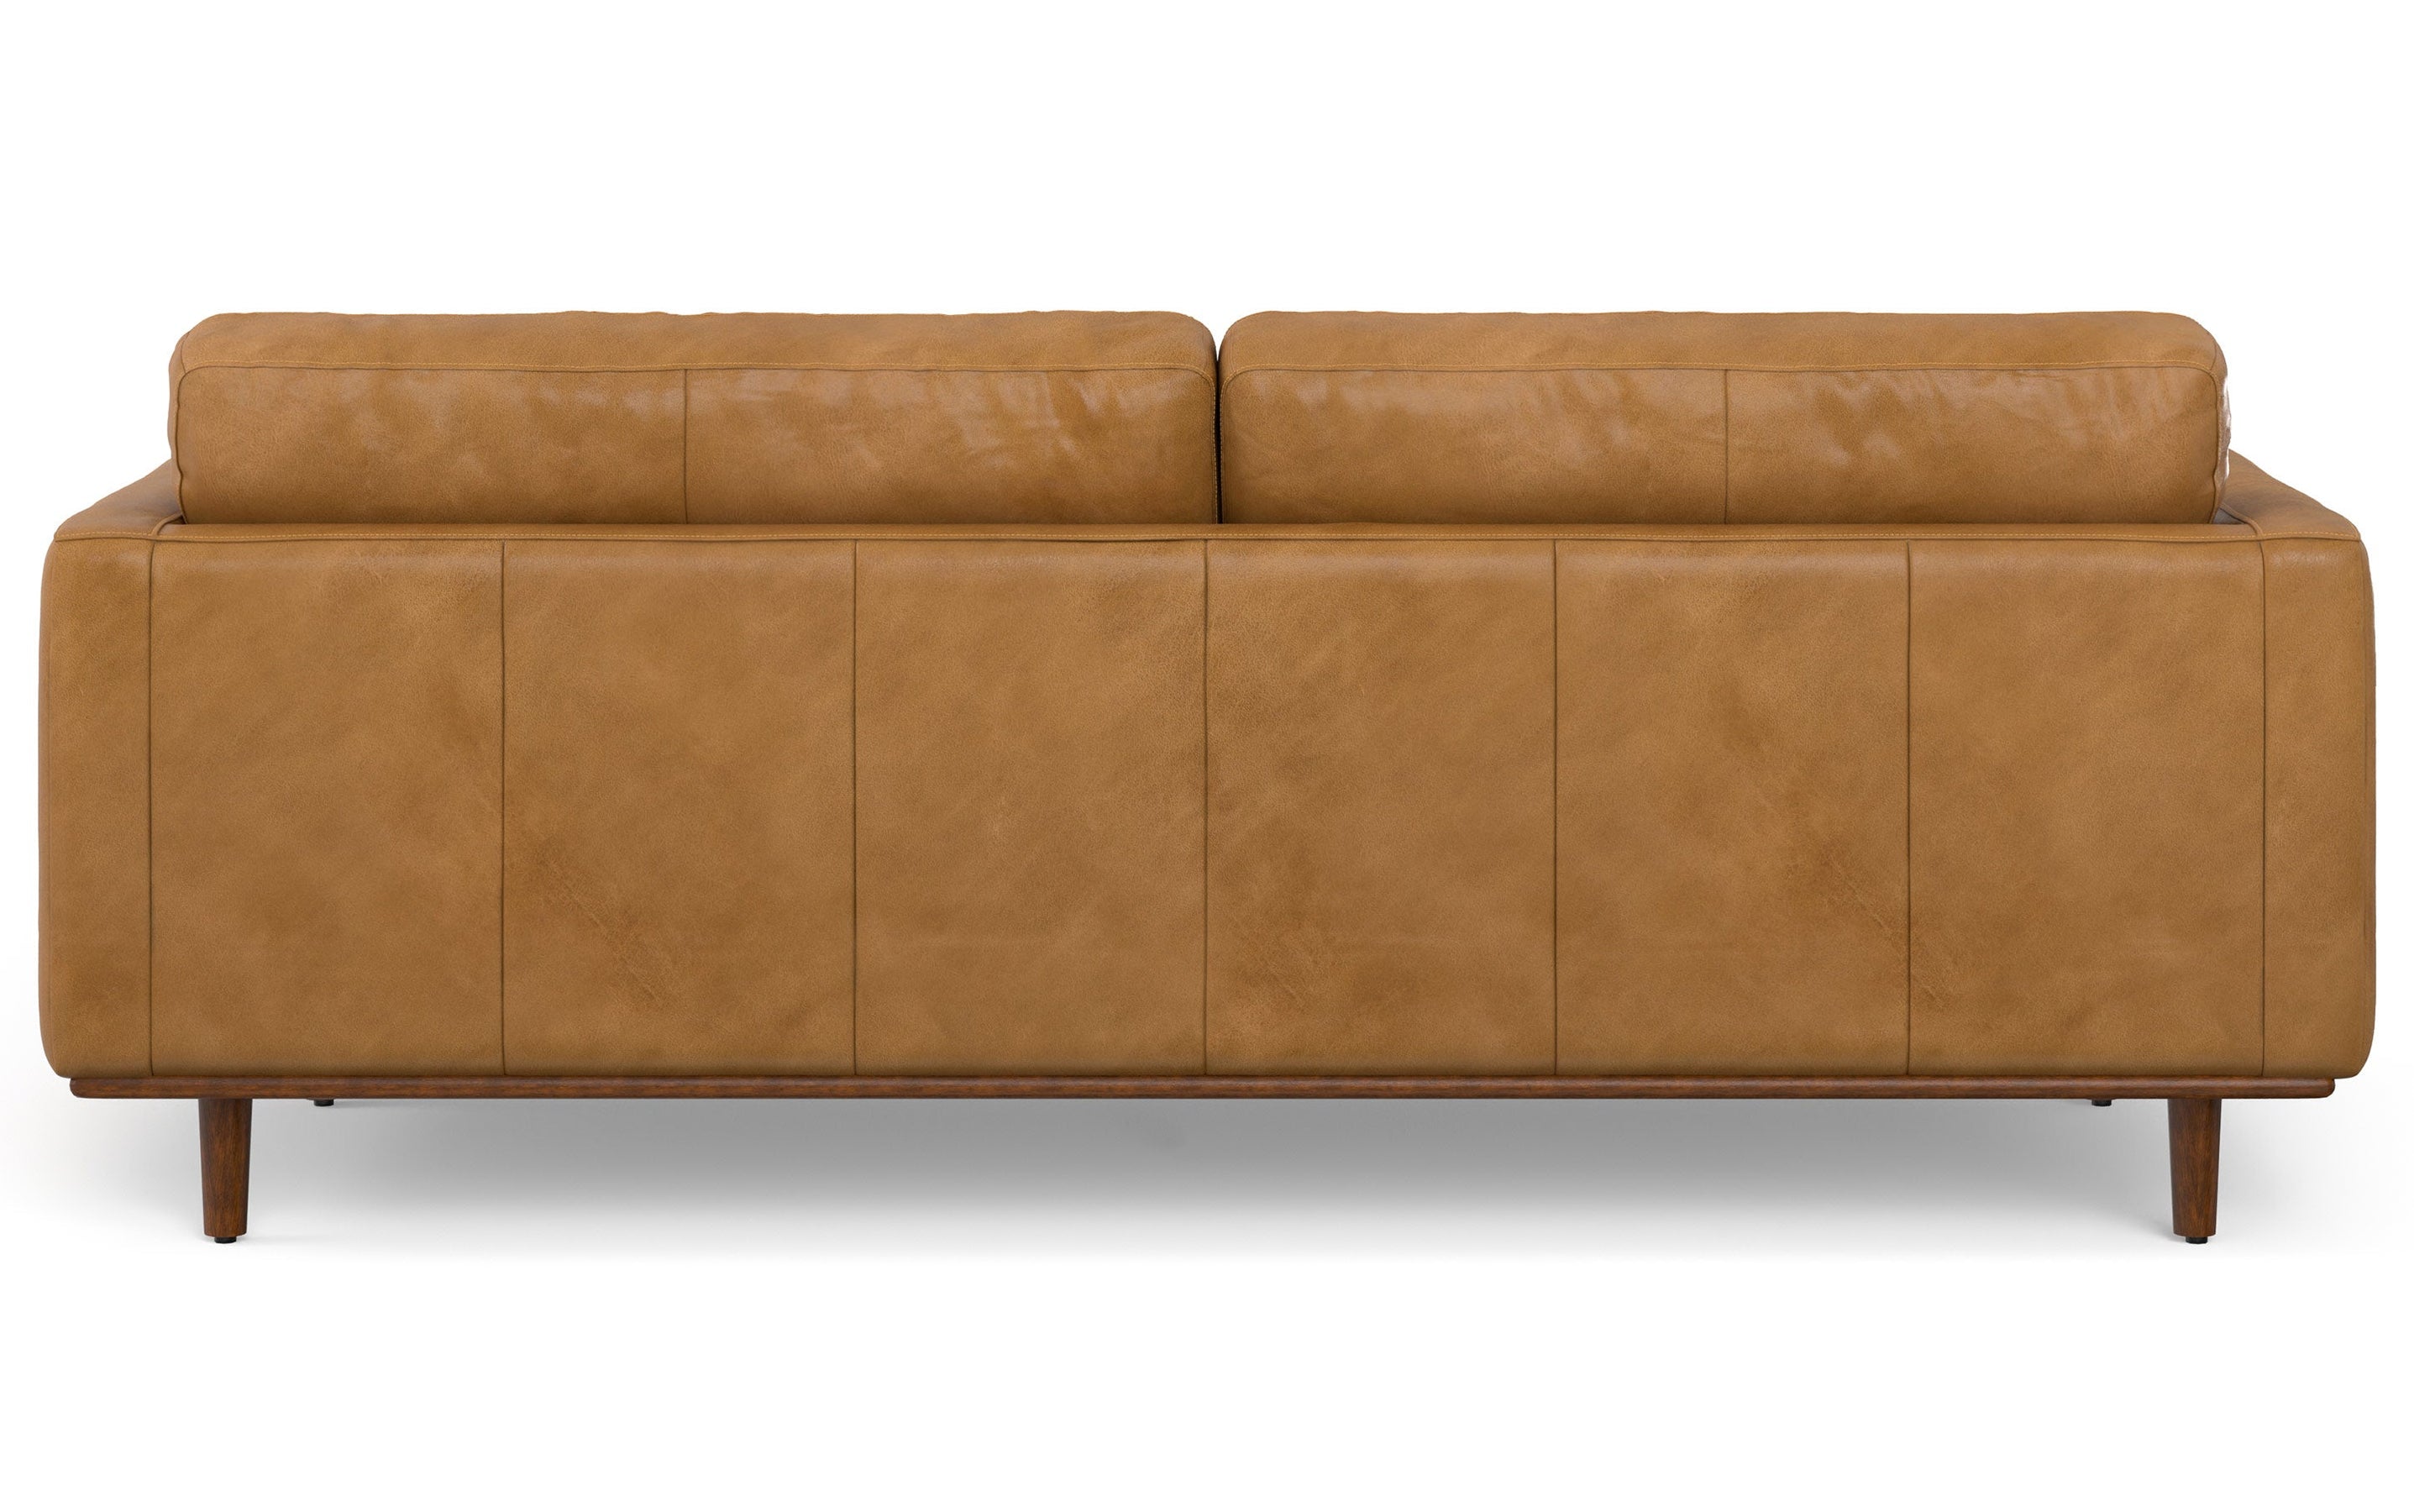 Sienna | Morrison 89-inch Sofa and Ottoman Set in Genuine Leather